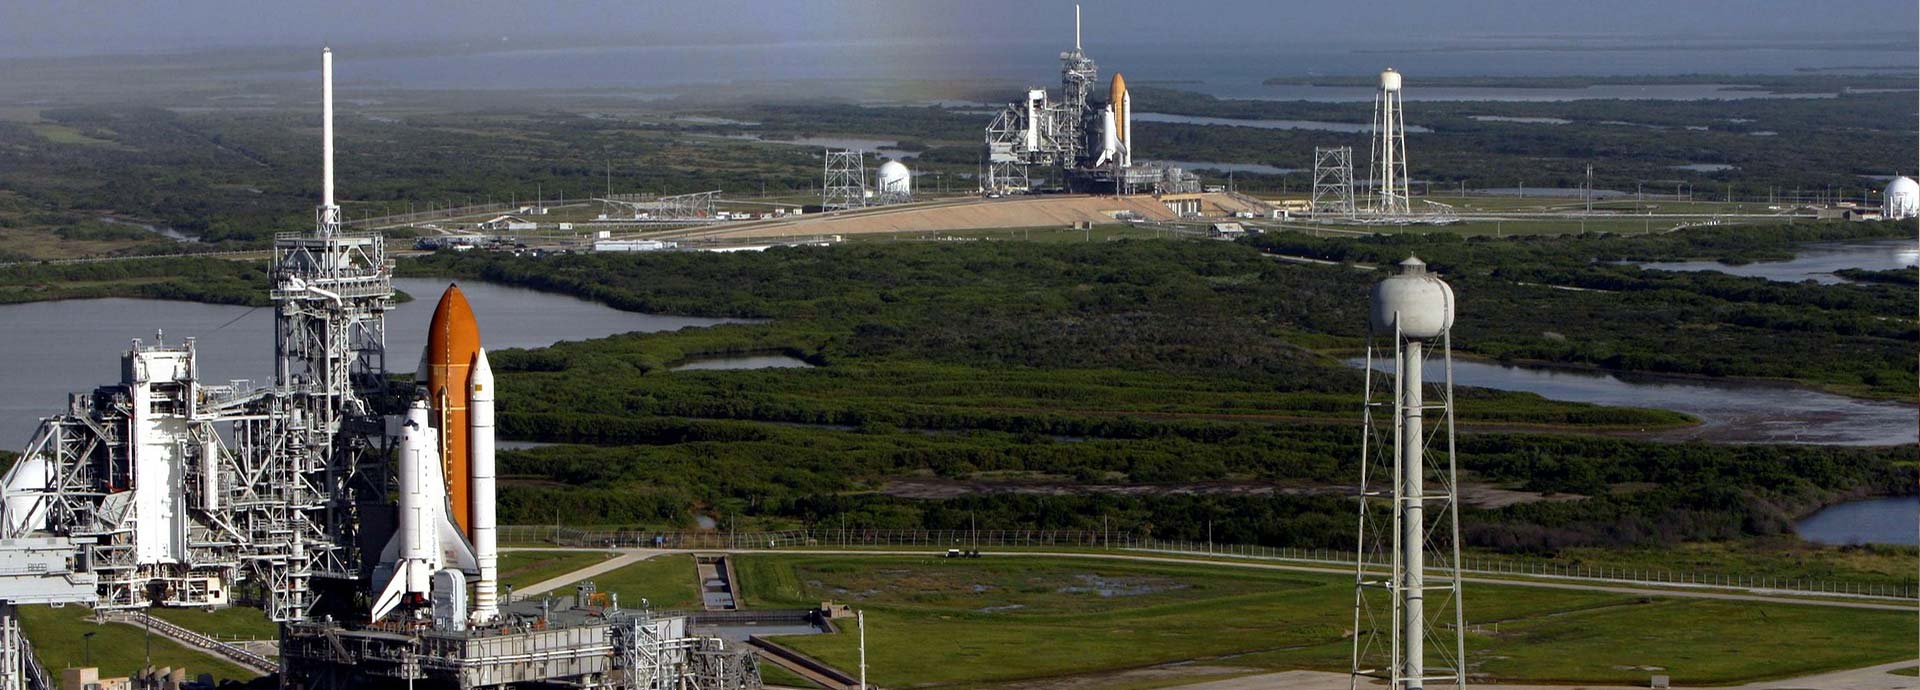 Visiting the Kennedy Space Center in Florida